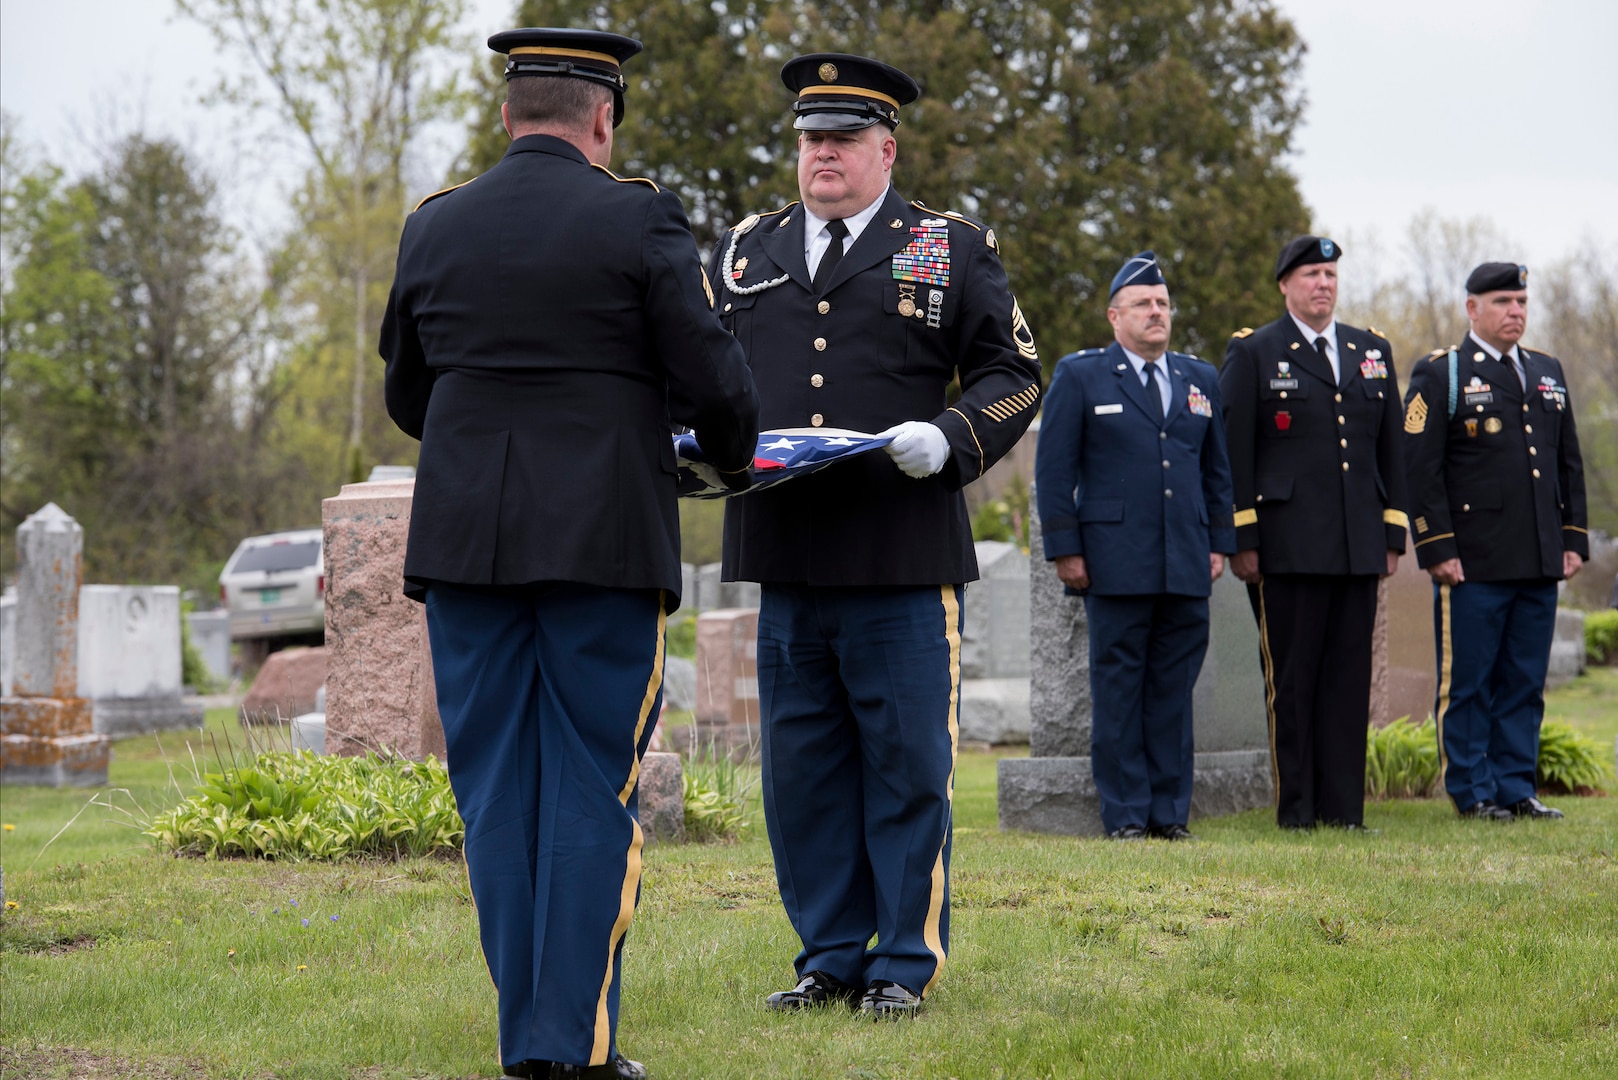 Perreault, who was reported missing in action on February 13, 1951 during the Korean War, was recently identified and returned to his family for burial with full military honors